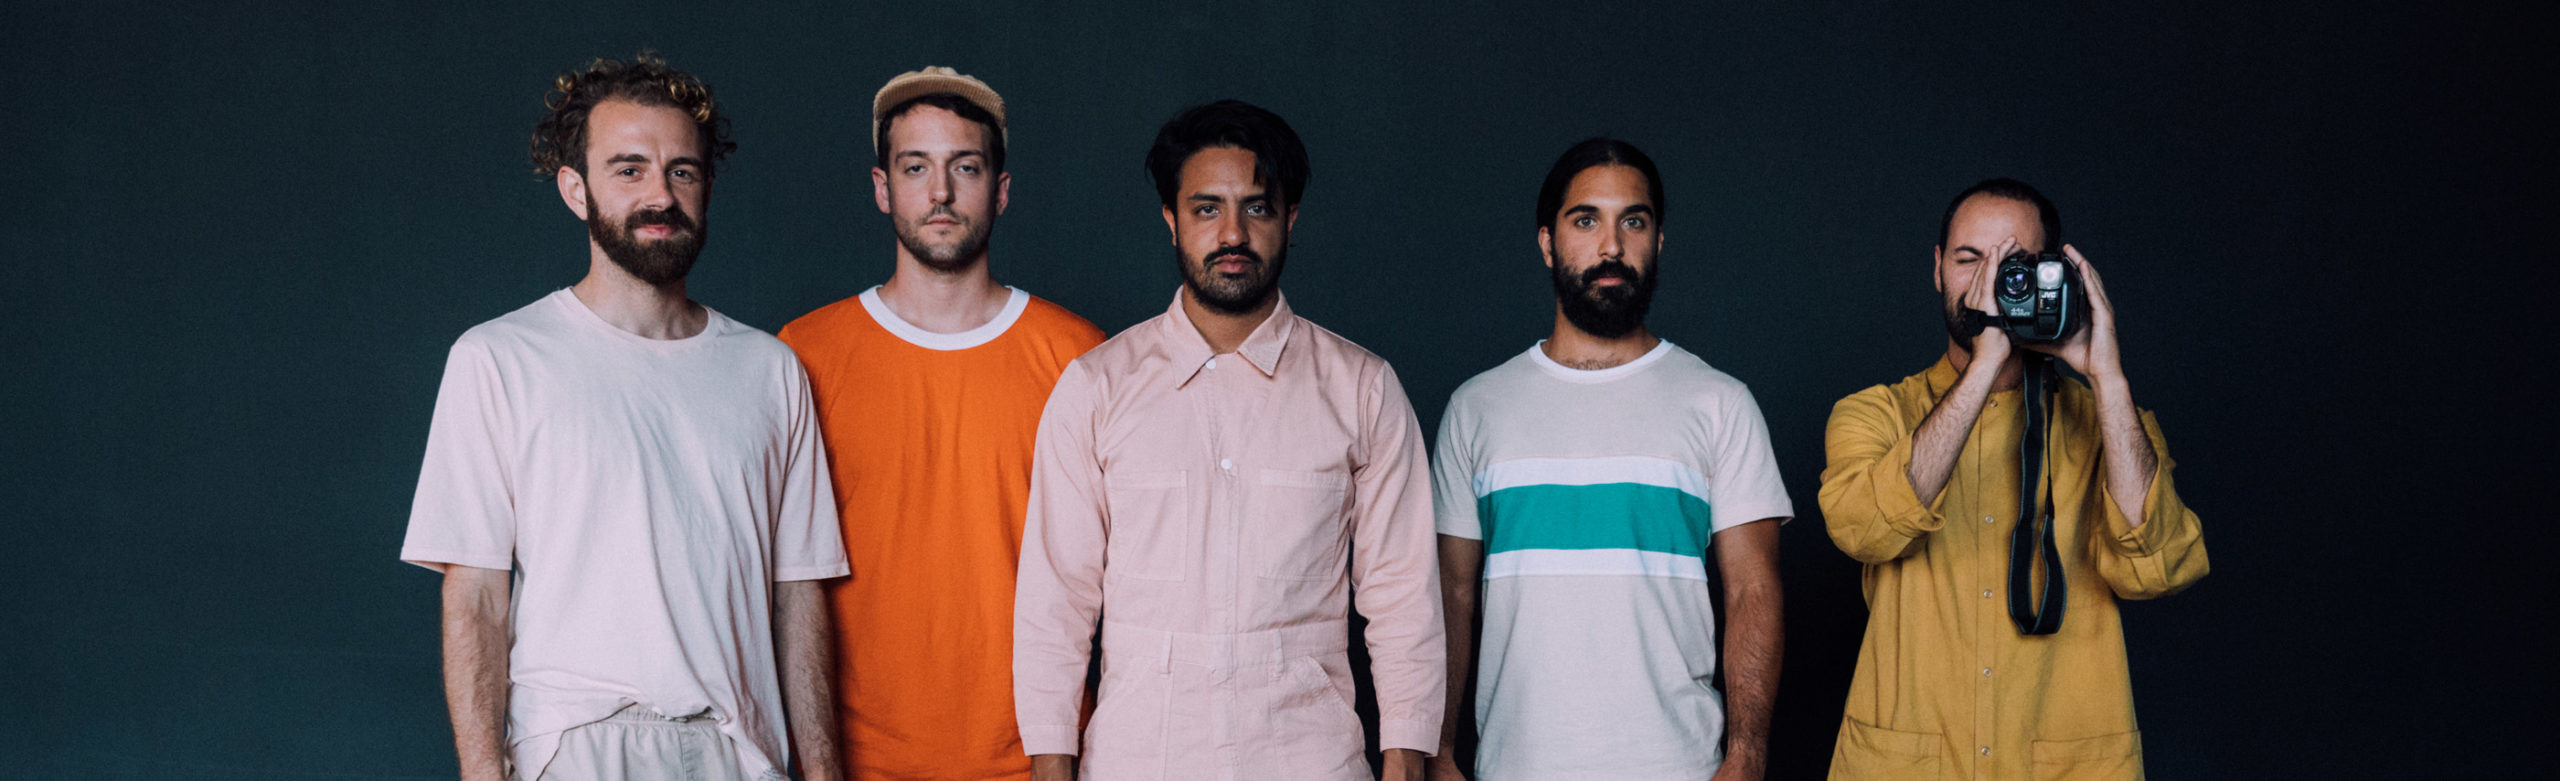 Mirror Master: Young the Giant to Bring Album Release Tour to Missoula Image